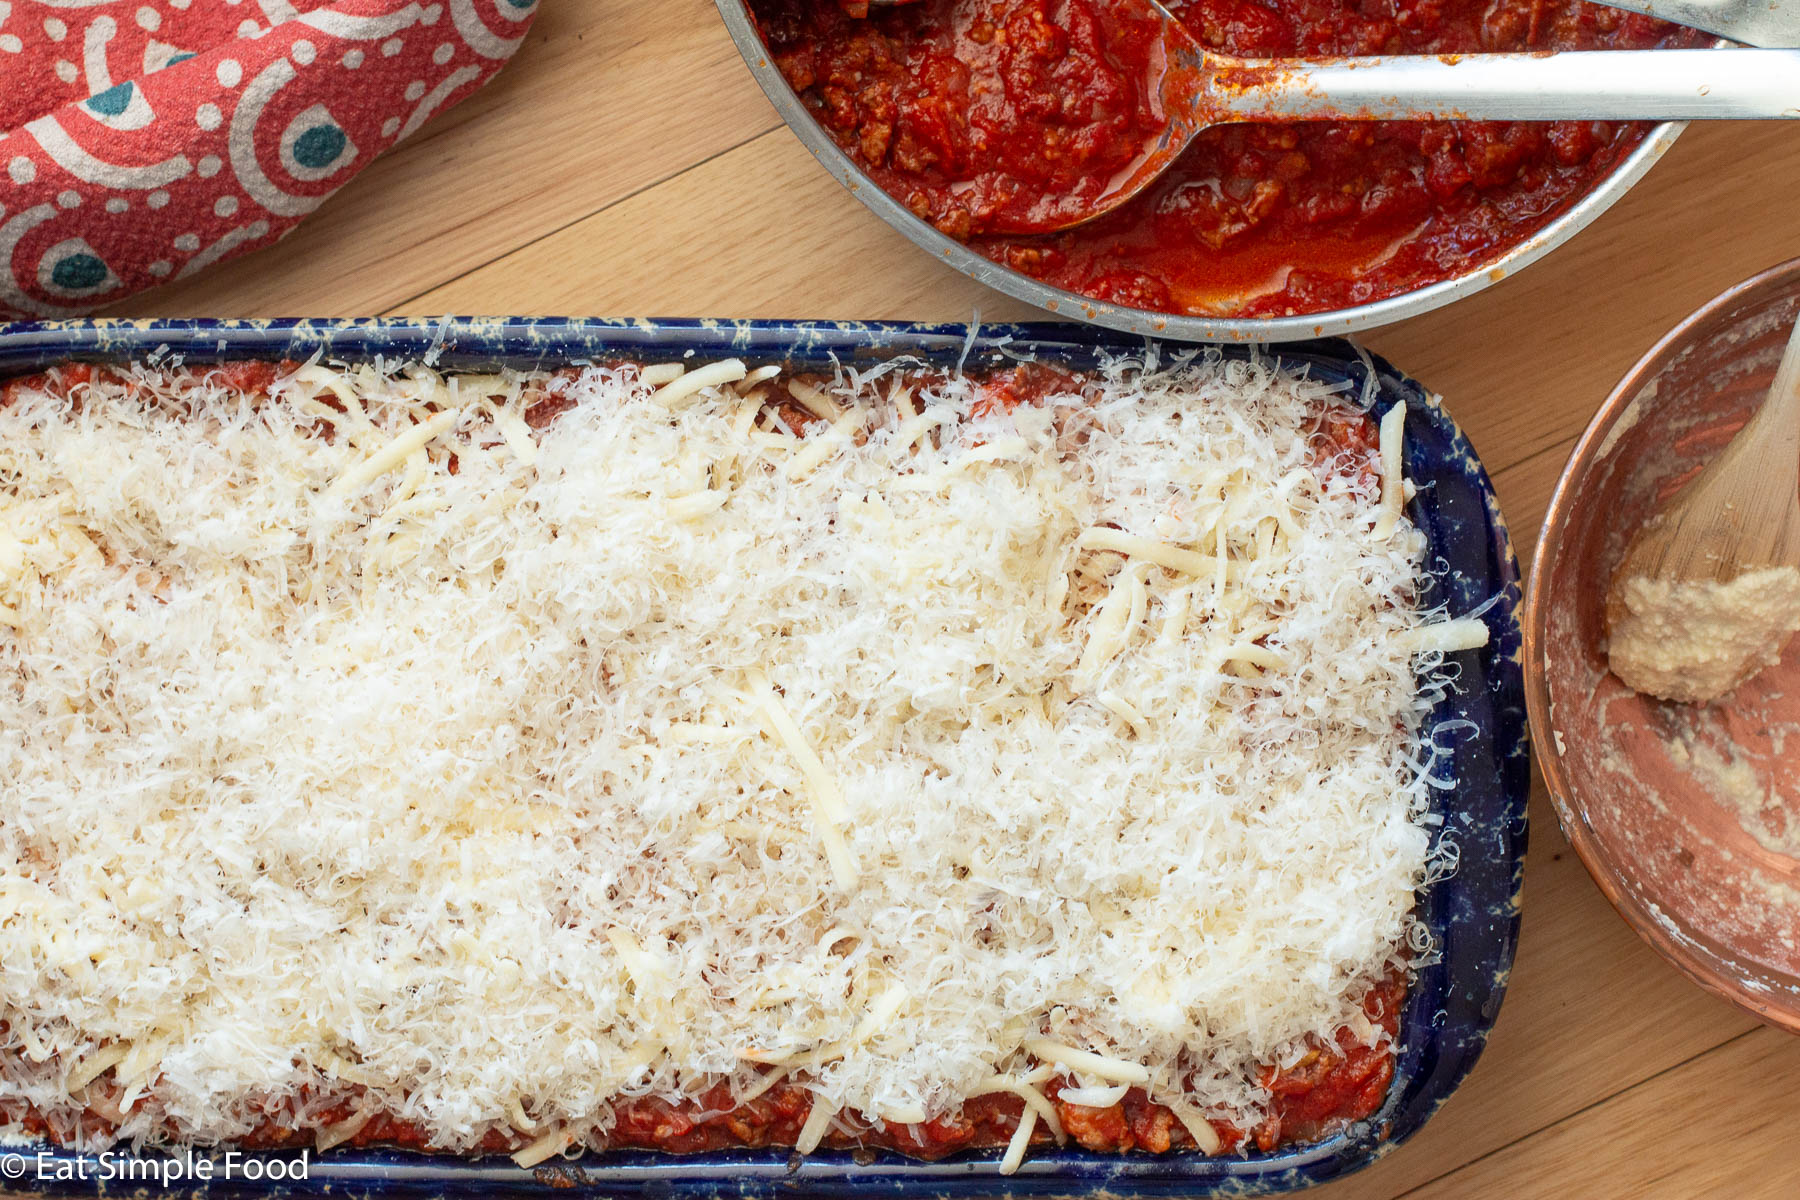 Top down view of a baking dish full of uncooked lasagna with grated white Parmesan and Mozzarella cheese on the top.